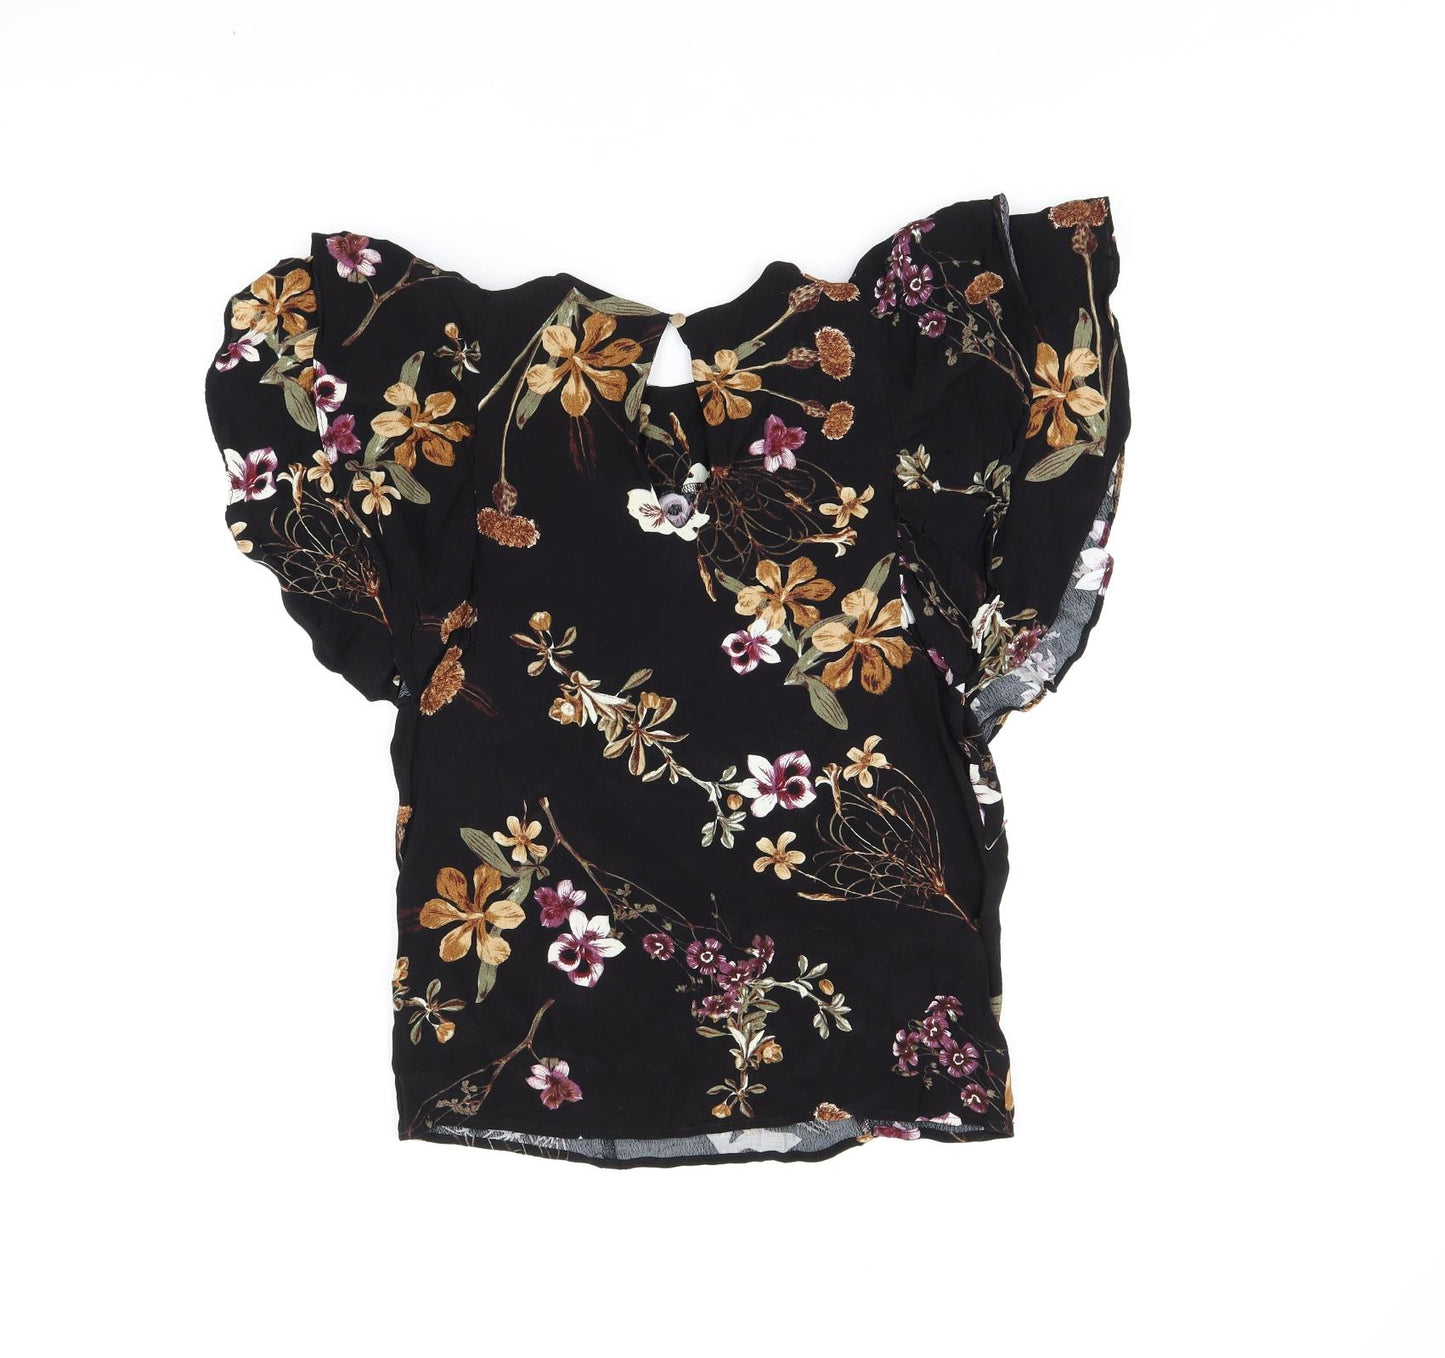 Y.A.S Womens Black Floral Viscose Basic Blouse Size S Round Neck - Frill Sleeves